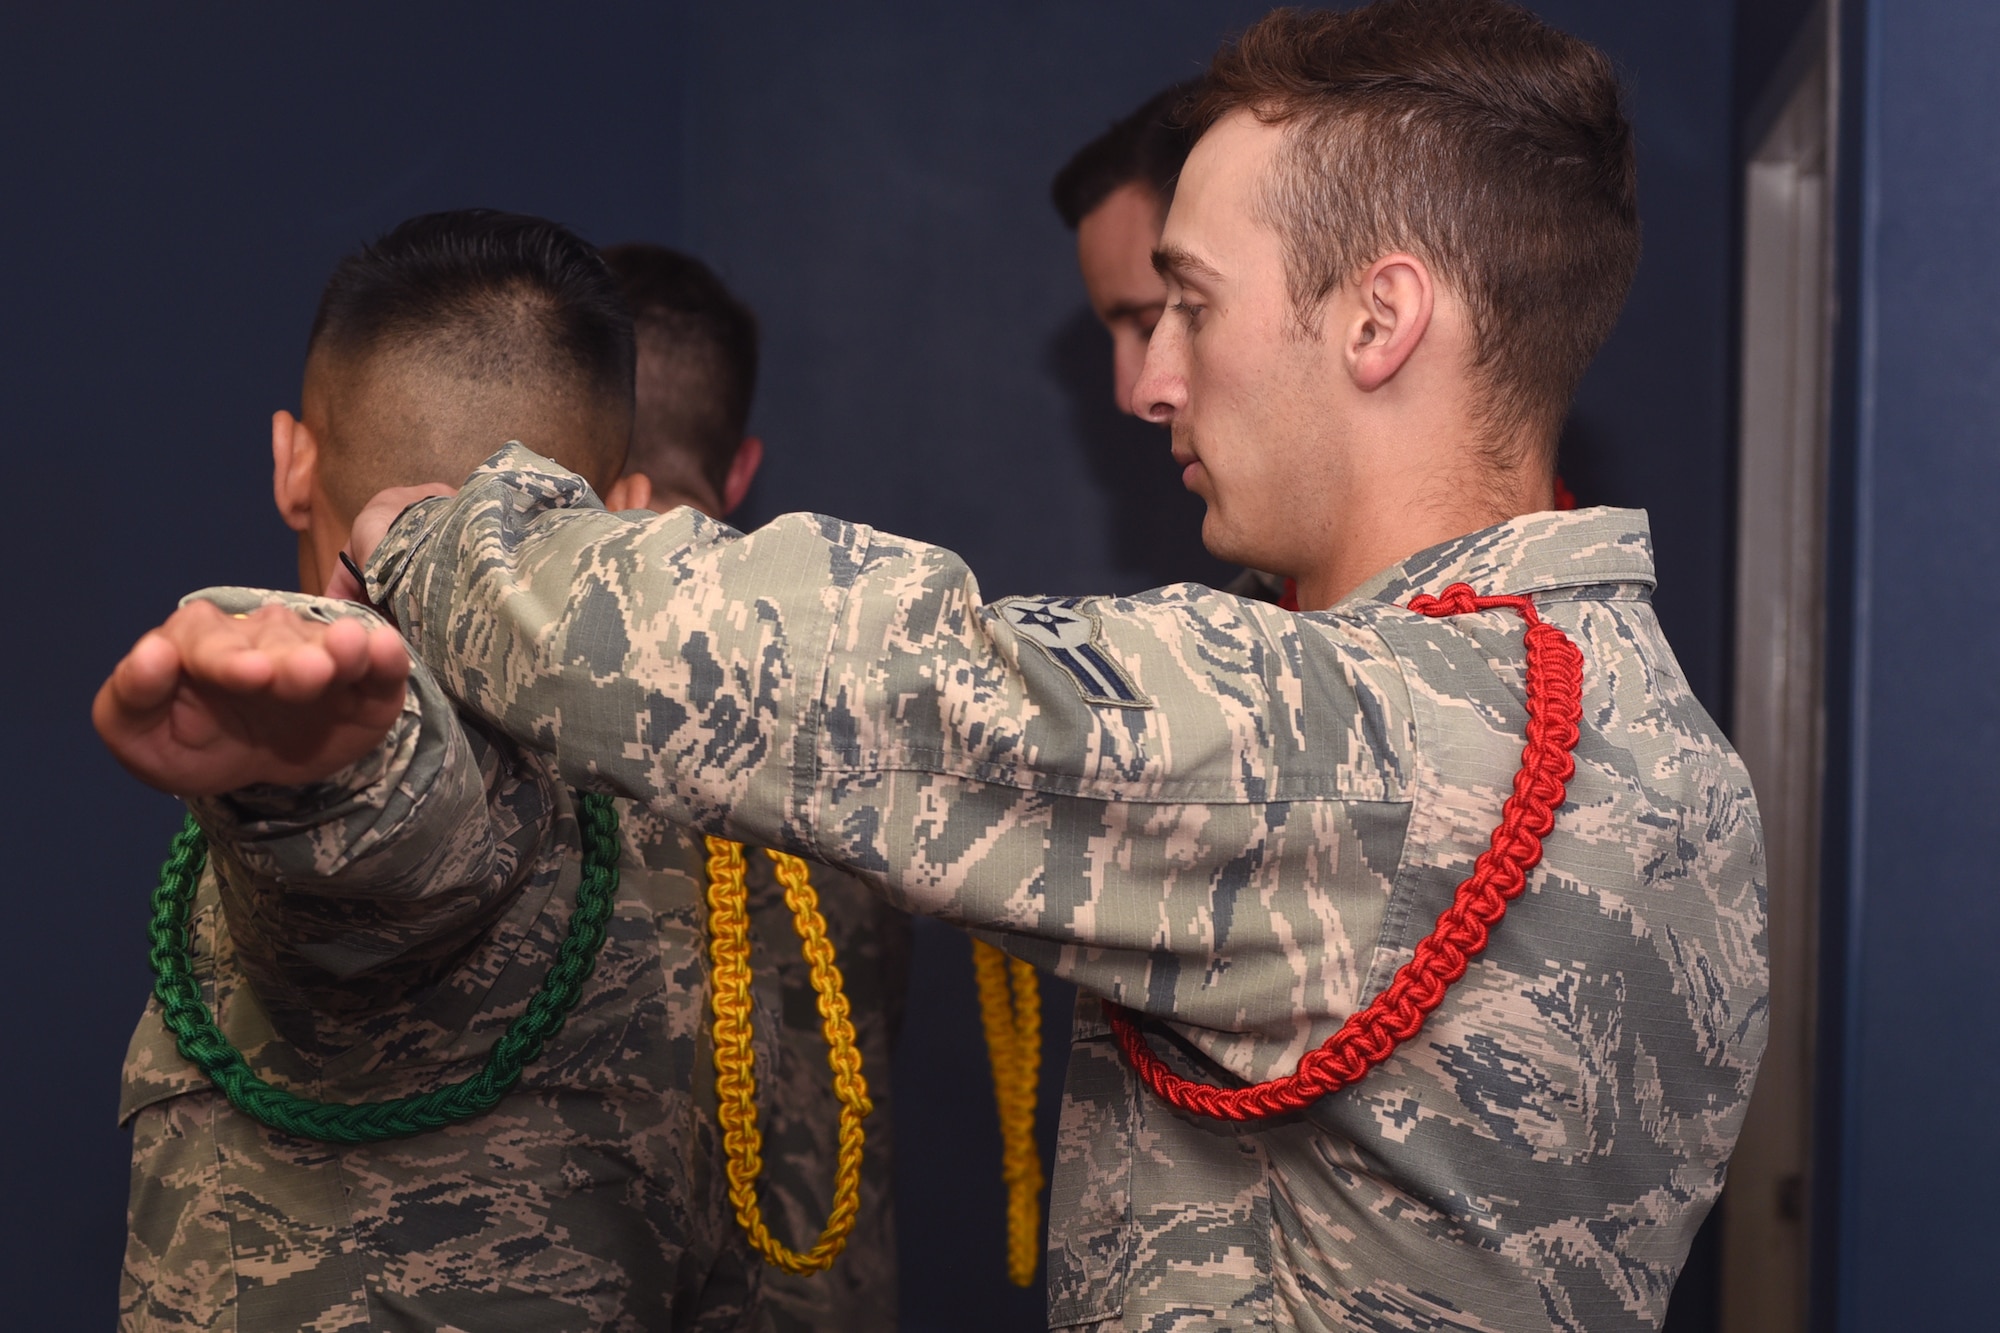 U.S. Air Force Airman 1st Class Joshua Winston, 316th Training Squadron student and a red rope level Airman Leader, removes the green rope from Airman 1st Class Vinz Dy Cruz, 316th TRS student, in order to promote Dy Cruz to a yellow rope during an Airman Leader meeting at the 316th TRS  on Goodfellow Air Force Base, Texas, May 14, 2019. Airman Leaders are promoted to the green, yellow and red level, each representing a higher level of responsibility retrospectively, after completing each level’s requirements. (U.S. Air Force photo by Airman 1st Class Abbey Rieves/Released)